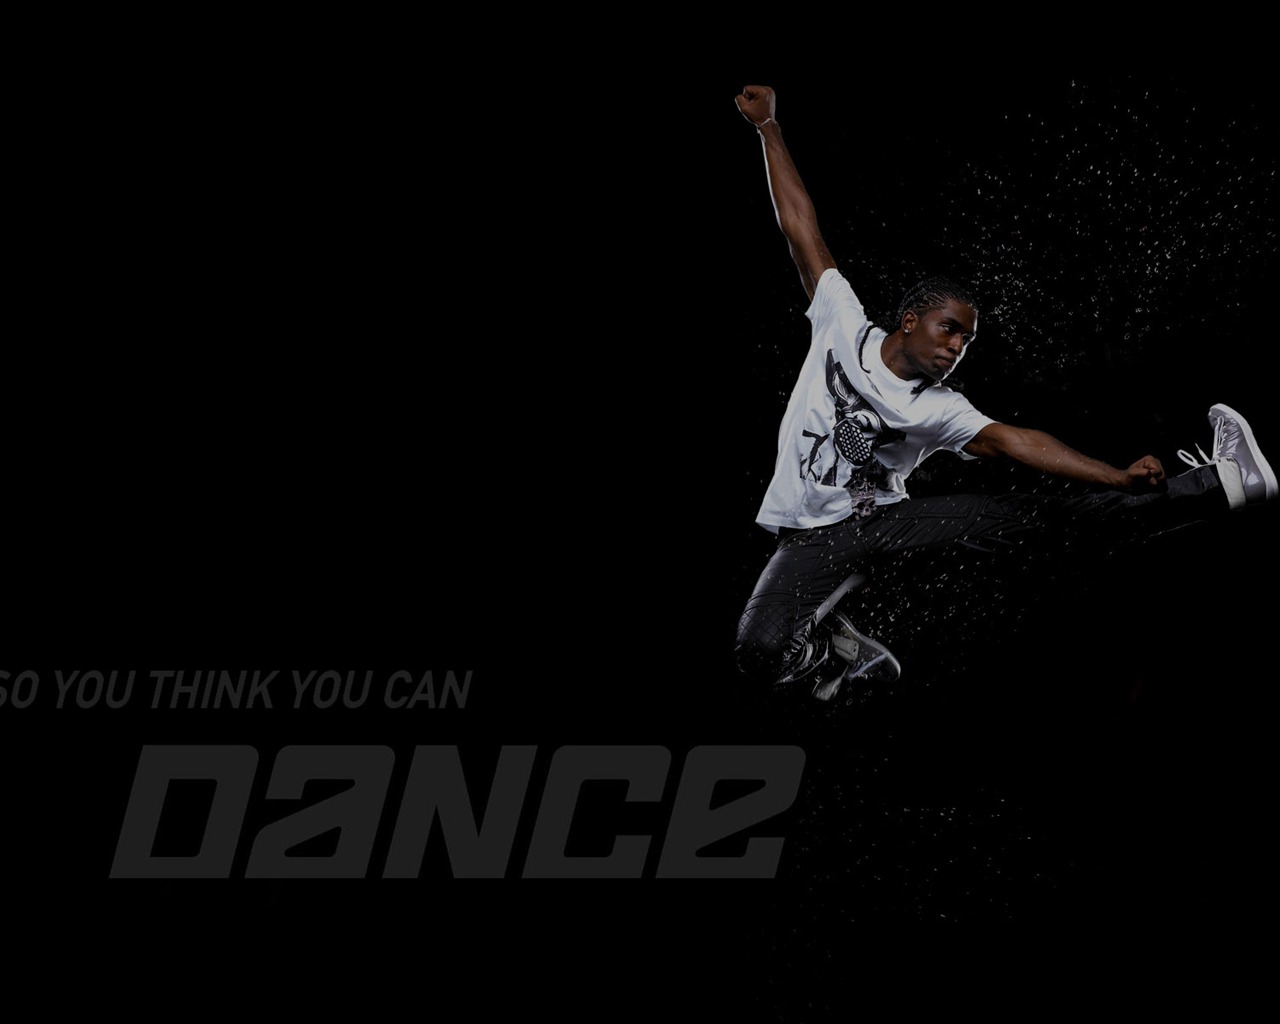 So You Think You Can Dance 舞林爭霸壁紙(二) #4 - 1280x1024